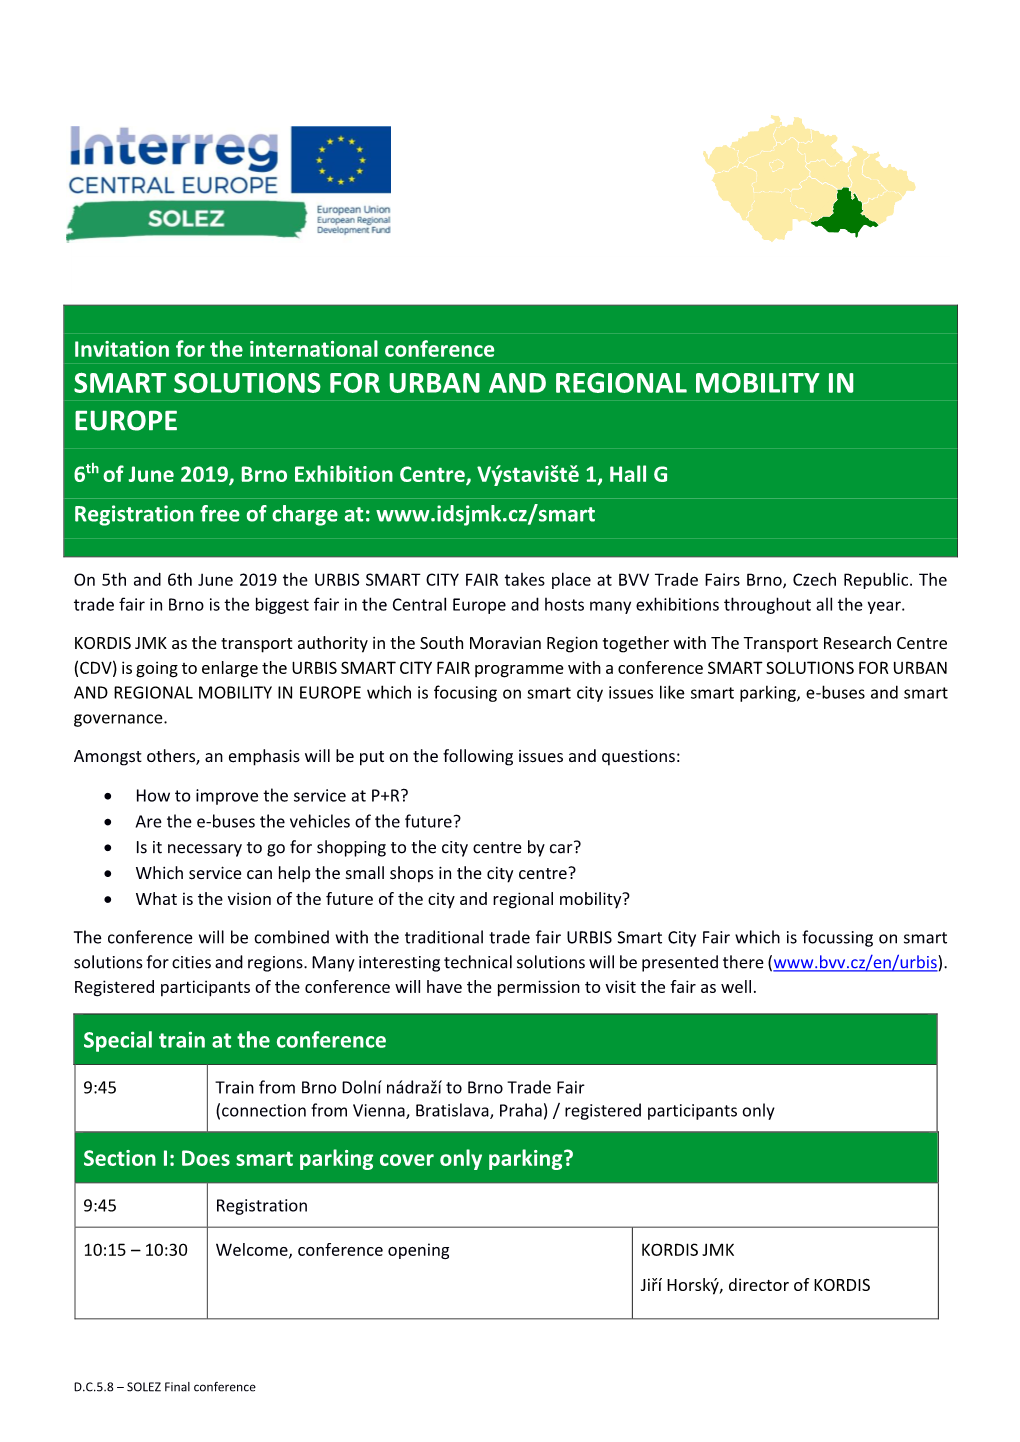 Conference SMART SOLUTIONS for URBAN and REGIONAL MOBILITY in EUROPE